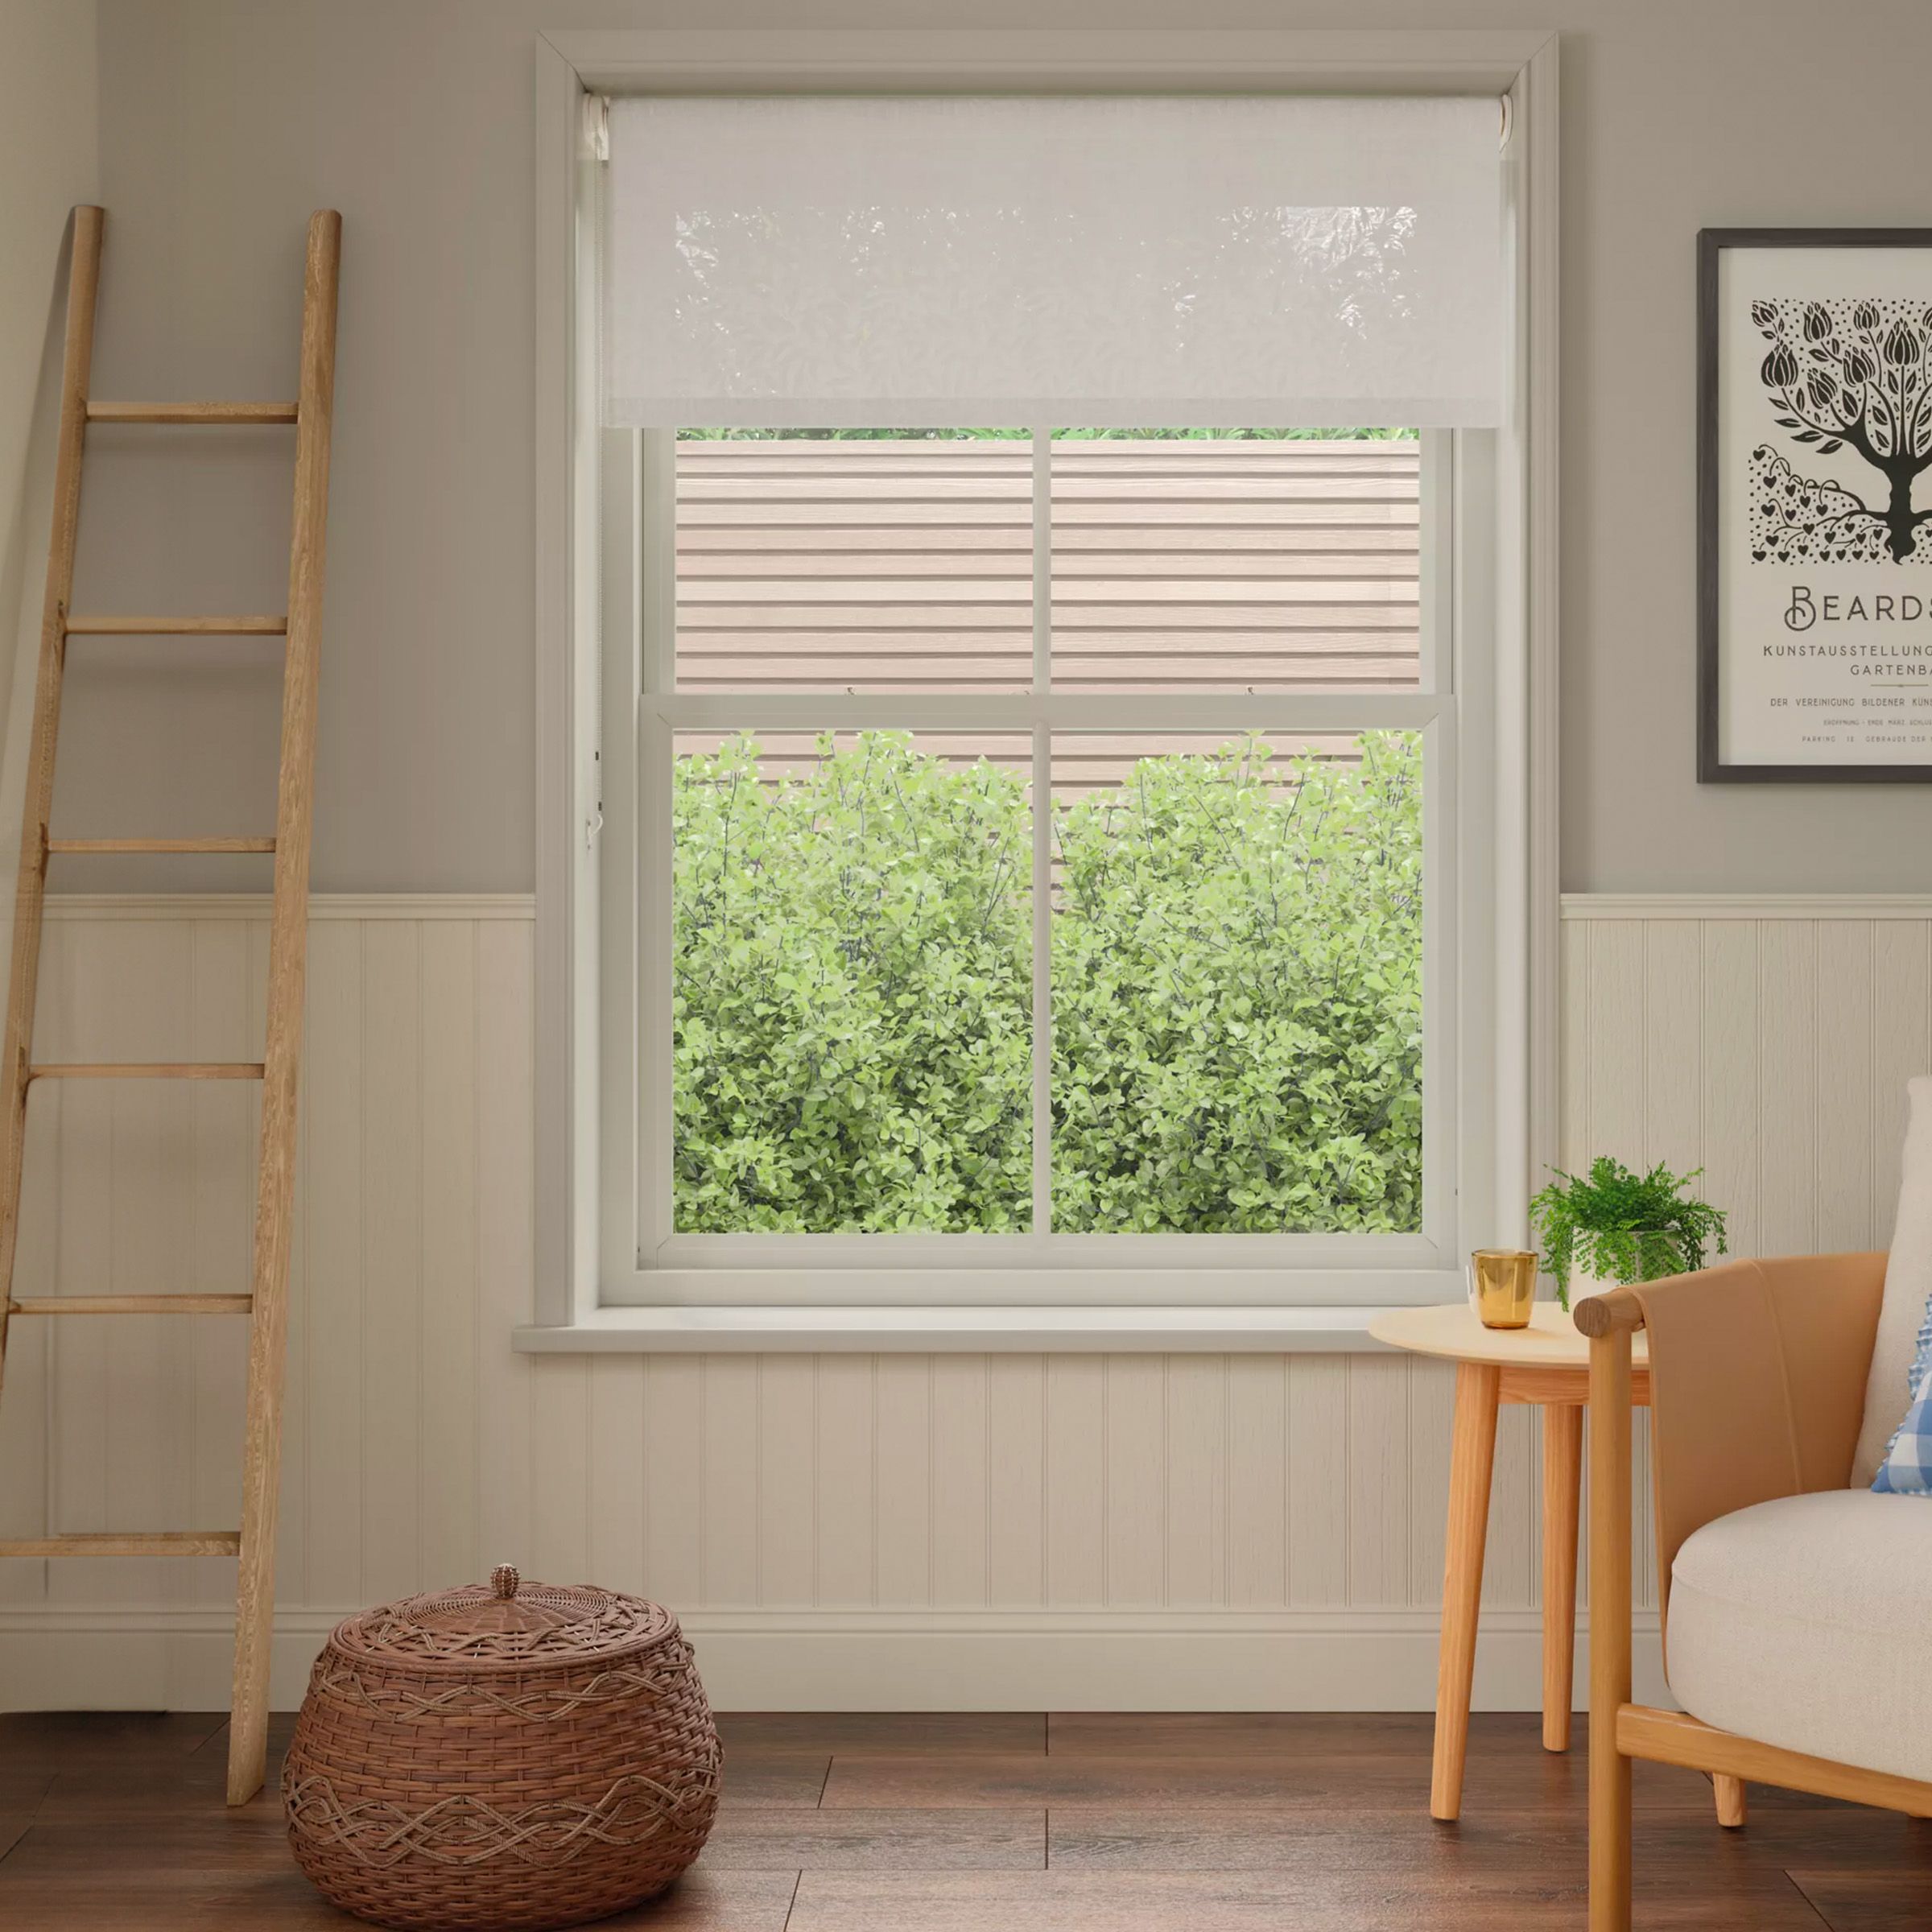 New express motorised roller blinds. Remote control operated. Convenience, easy operated. Blackout. Thermal hence energy efficient -Linen Mix: natural fibres .